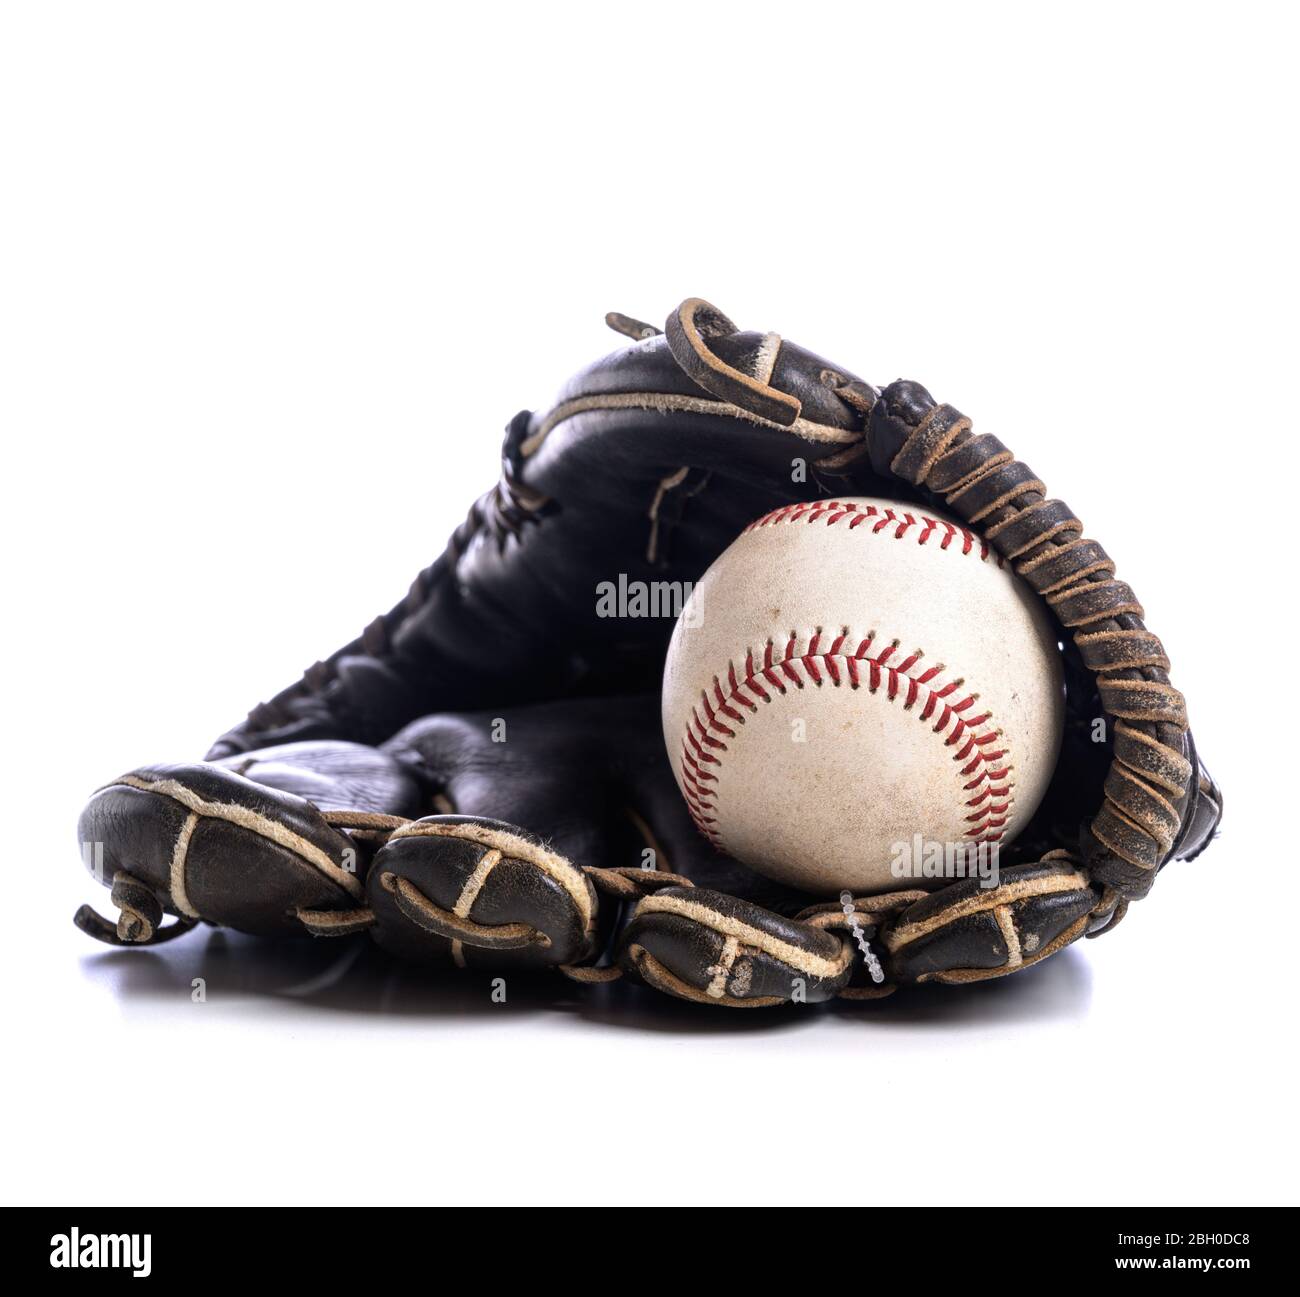 A close up of a Leather baseball glove and ball Stock Photo